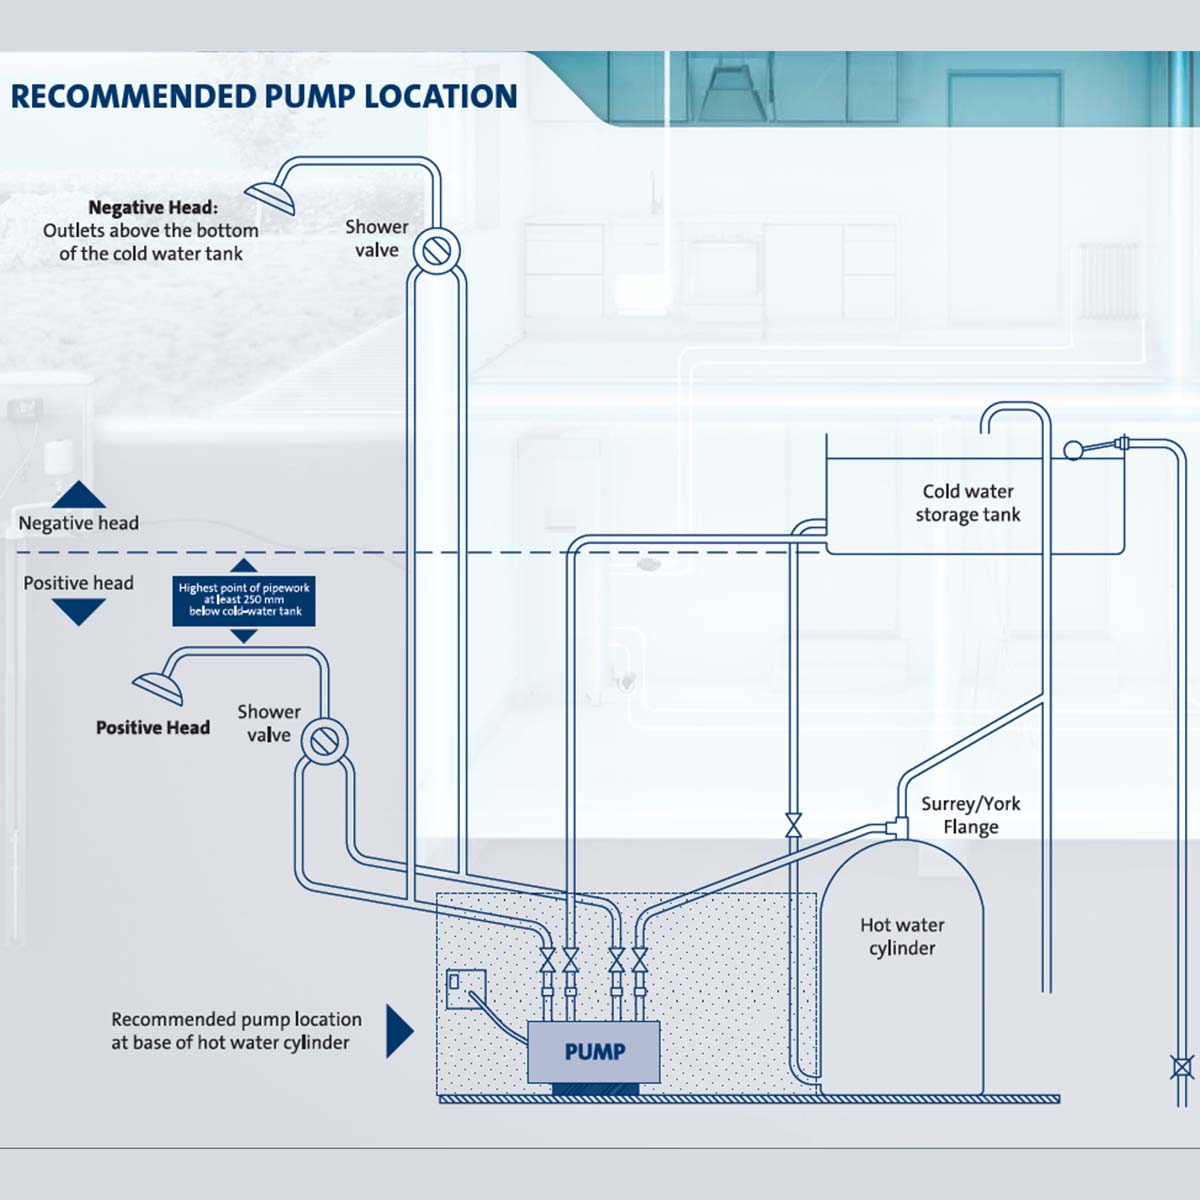 grundfos recommended pump location